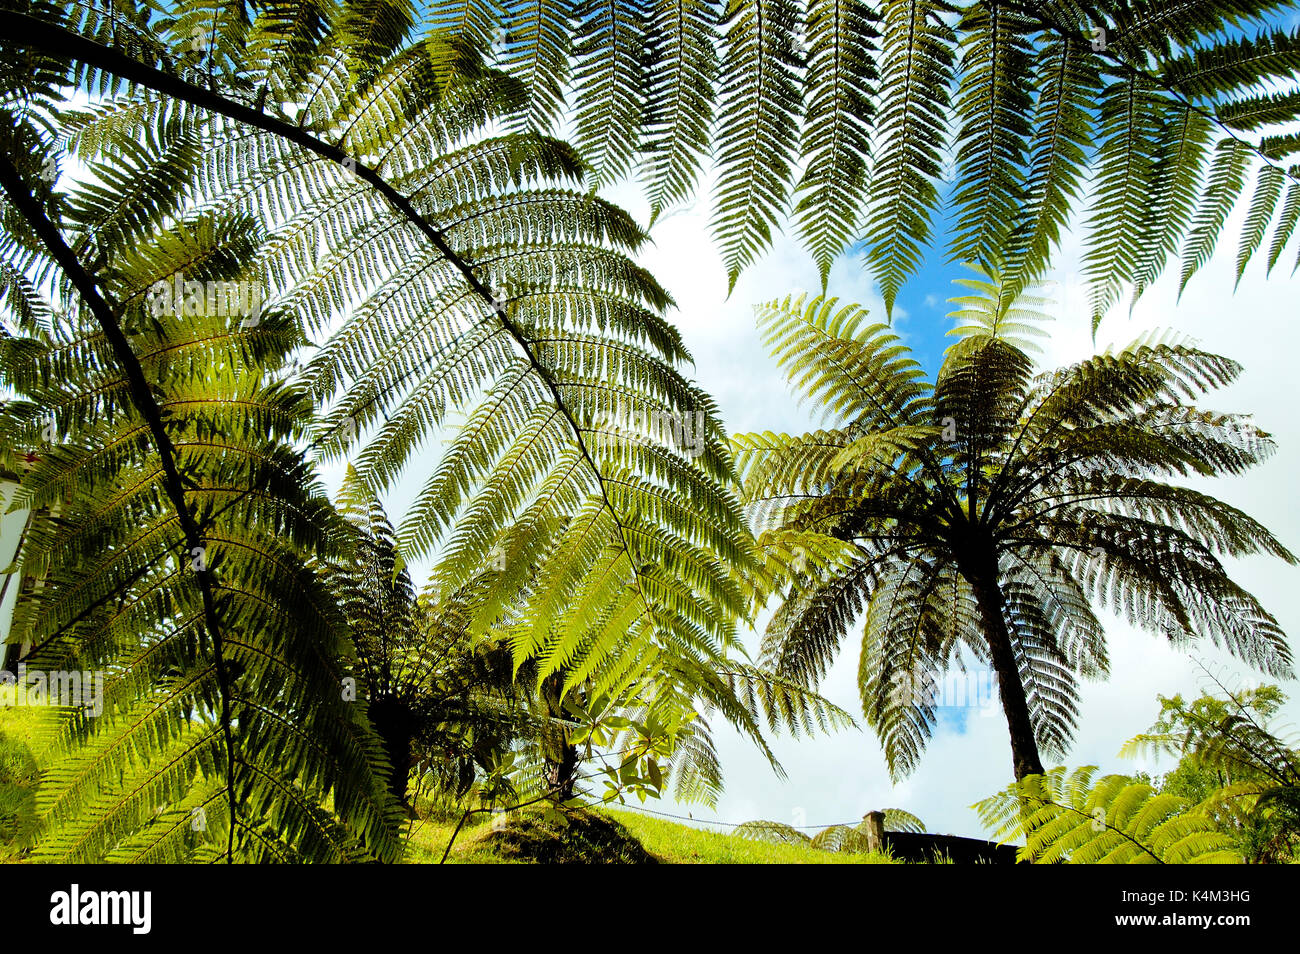 Giant ferns in Furnas. São Miguel, Azores islands, Portugal Stock Photo